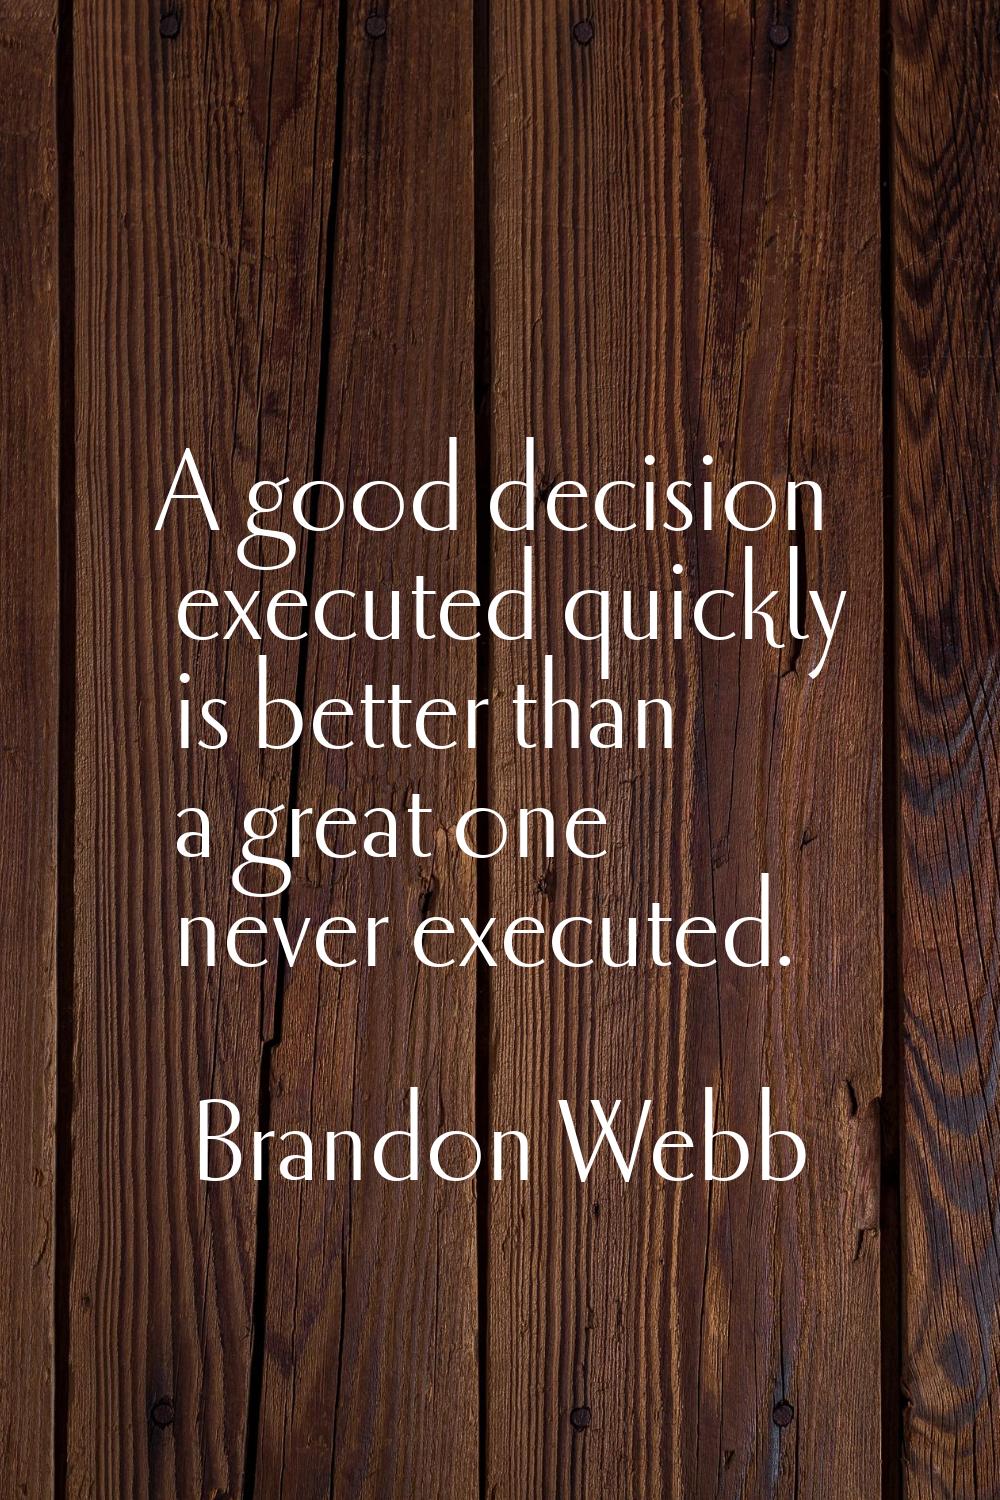 A good decision executed quickly is better than a great one never executed.